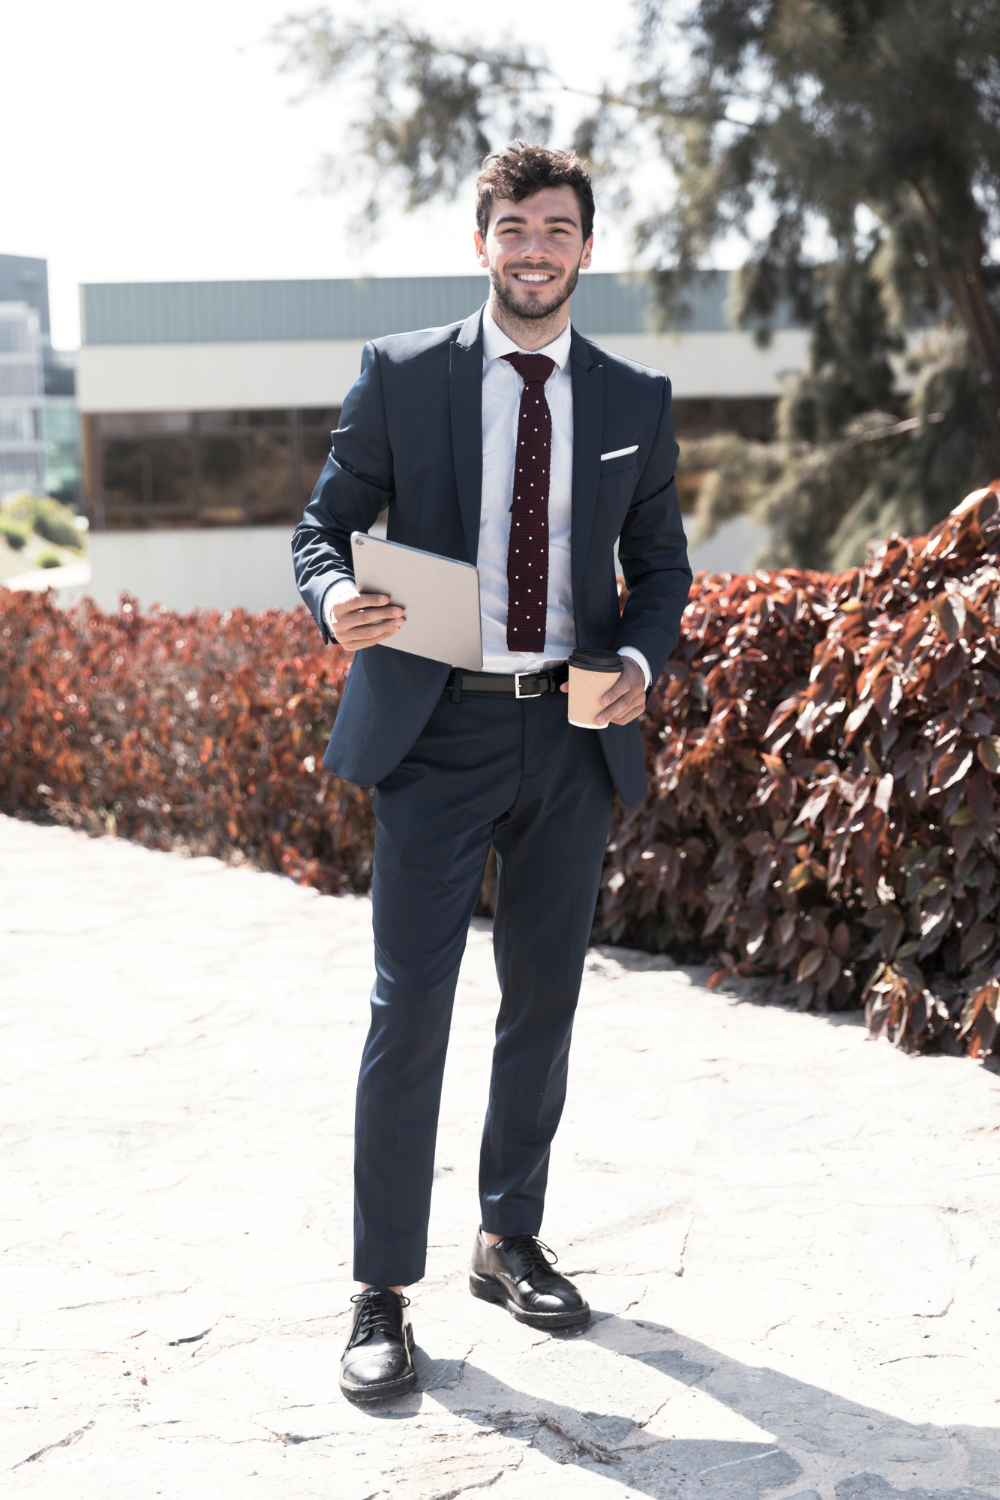 A semi-formal suit outfit for men